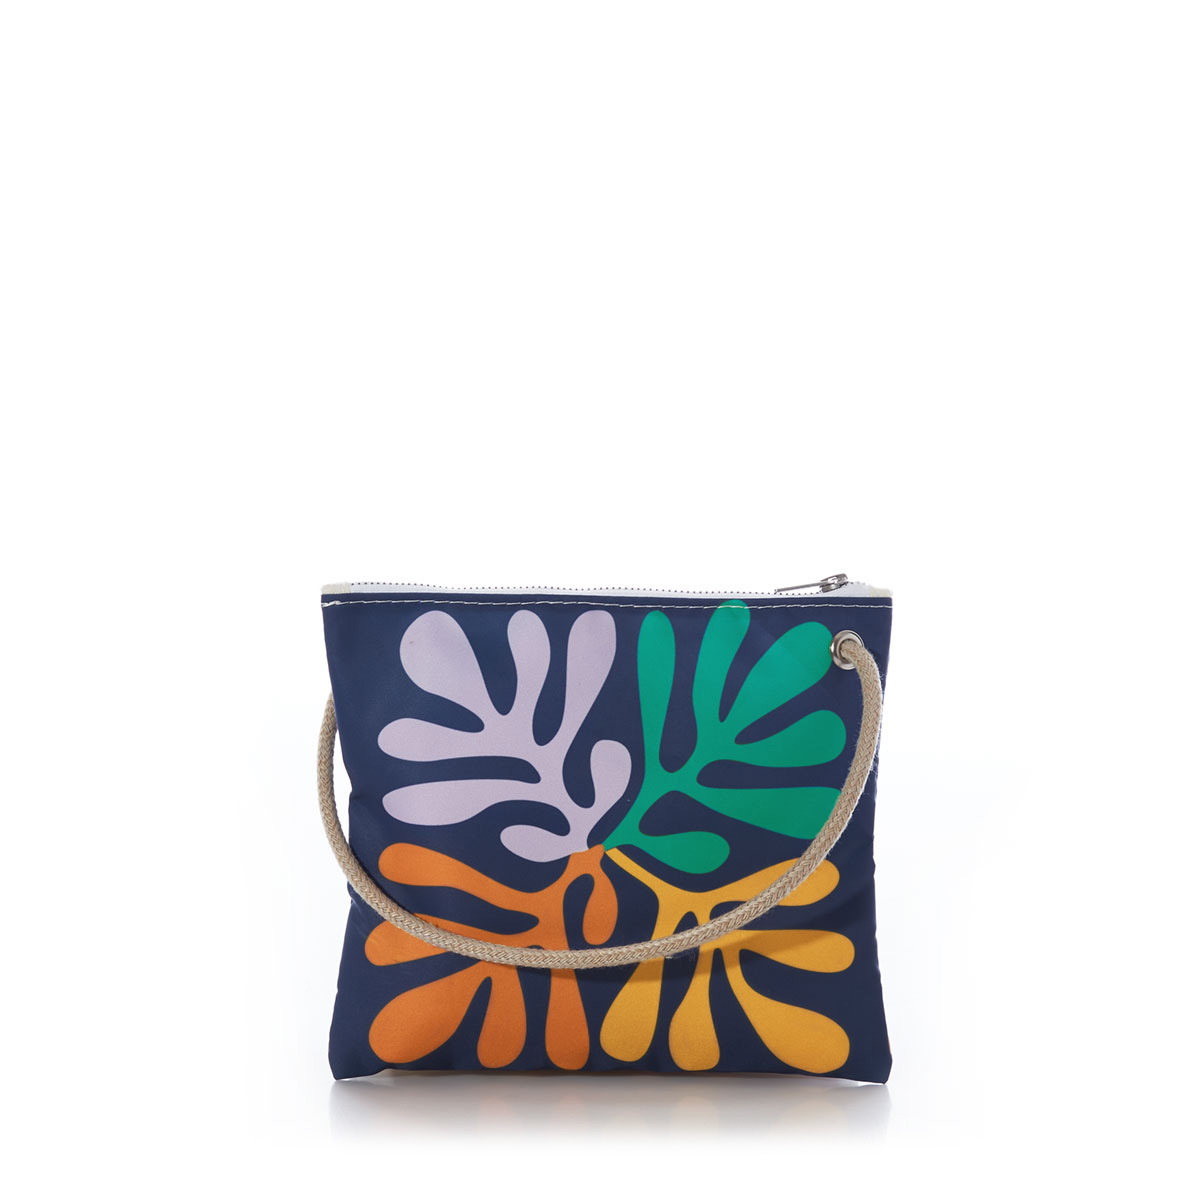 back side of a navy sail cloth crossbody bag with long hemp rope handle is printed with a pattern of four blocks of four different colors of a strand of seaweed floral design